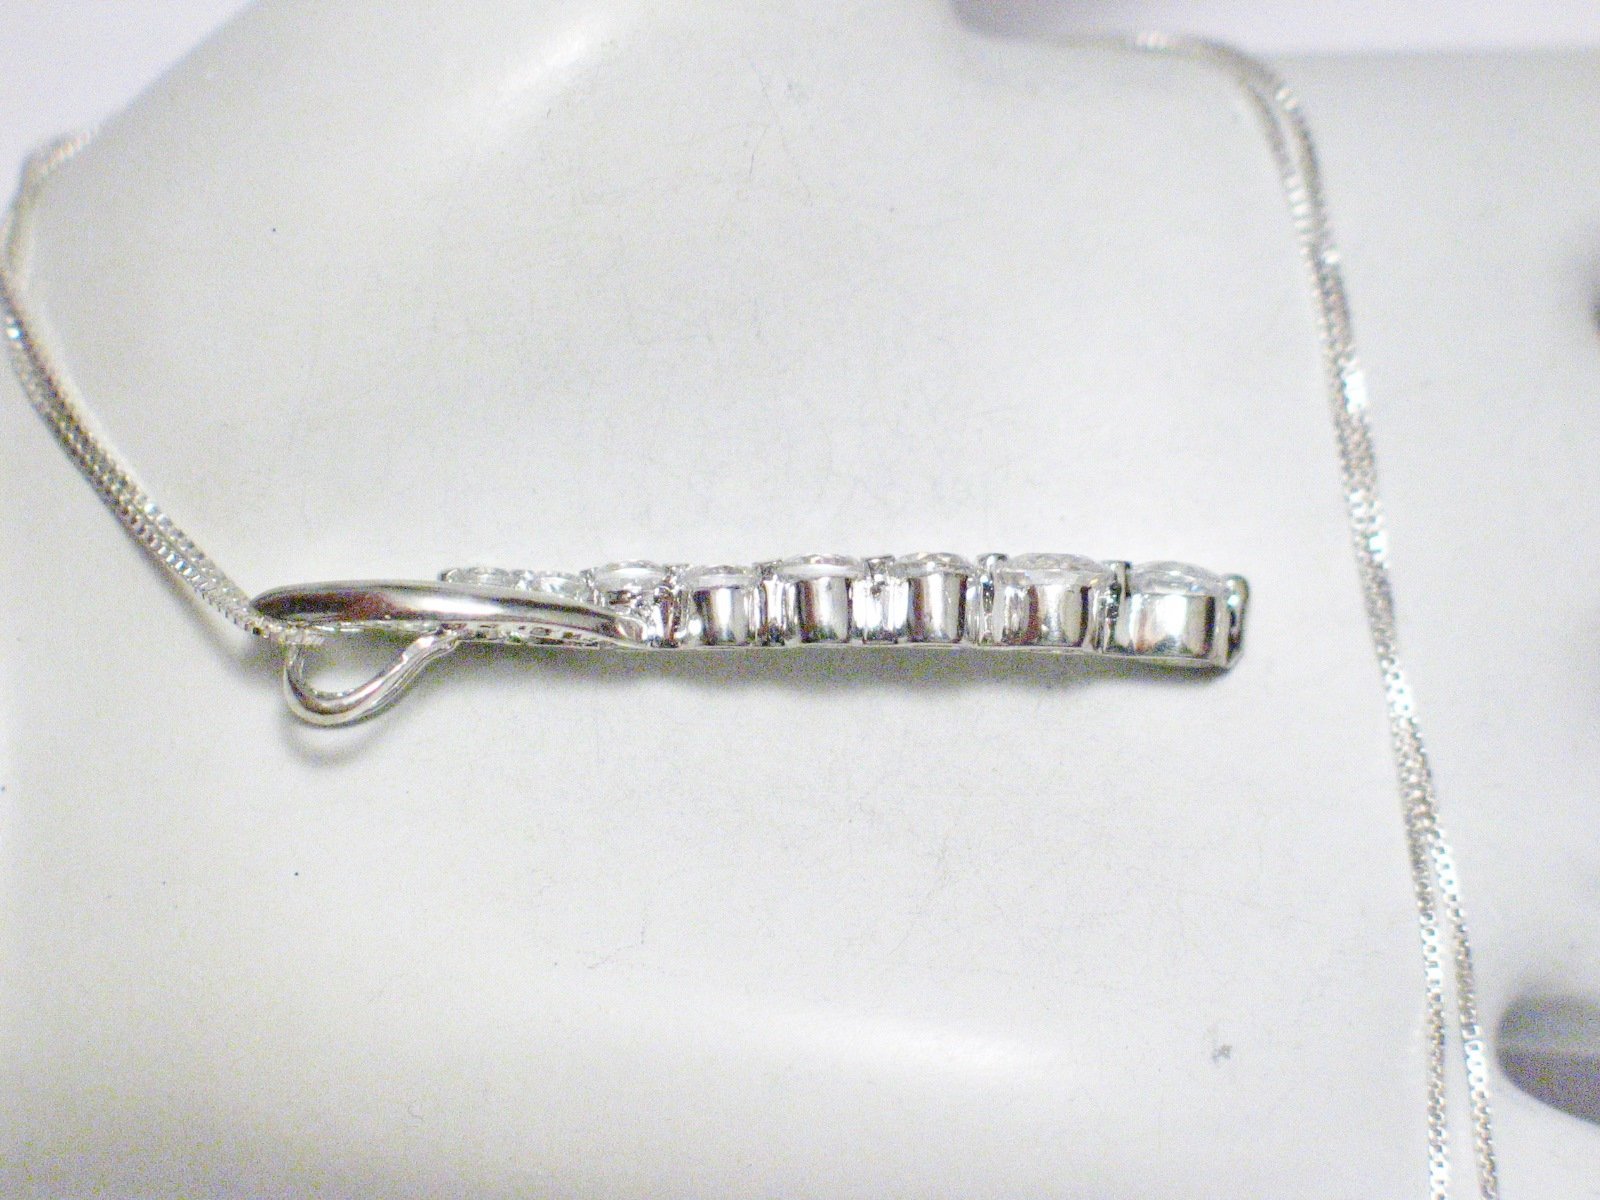 Chain Necklace Pendant Set Sterling Silver Box Link Cz Gemstone Charm 18" - Blingschlingers Jewelry